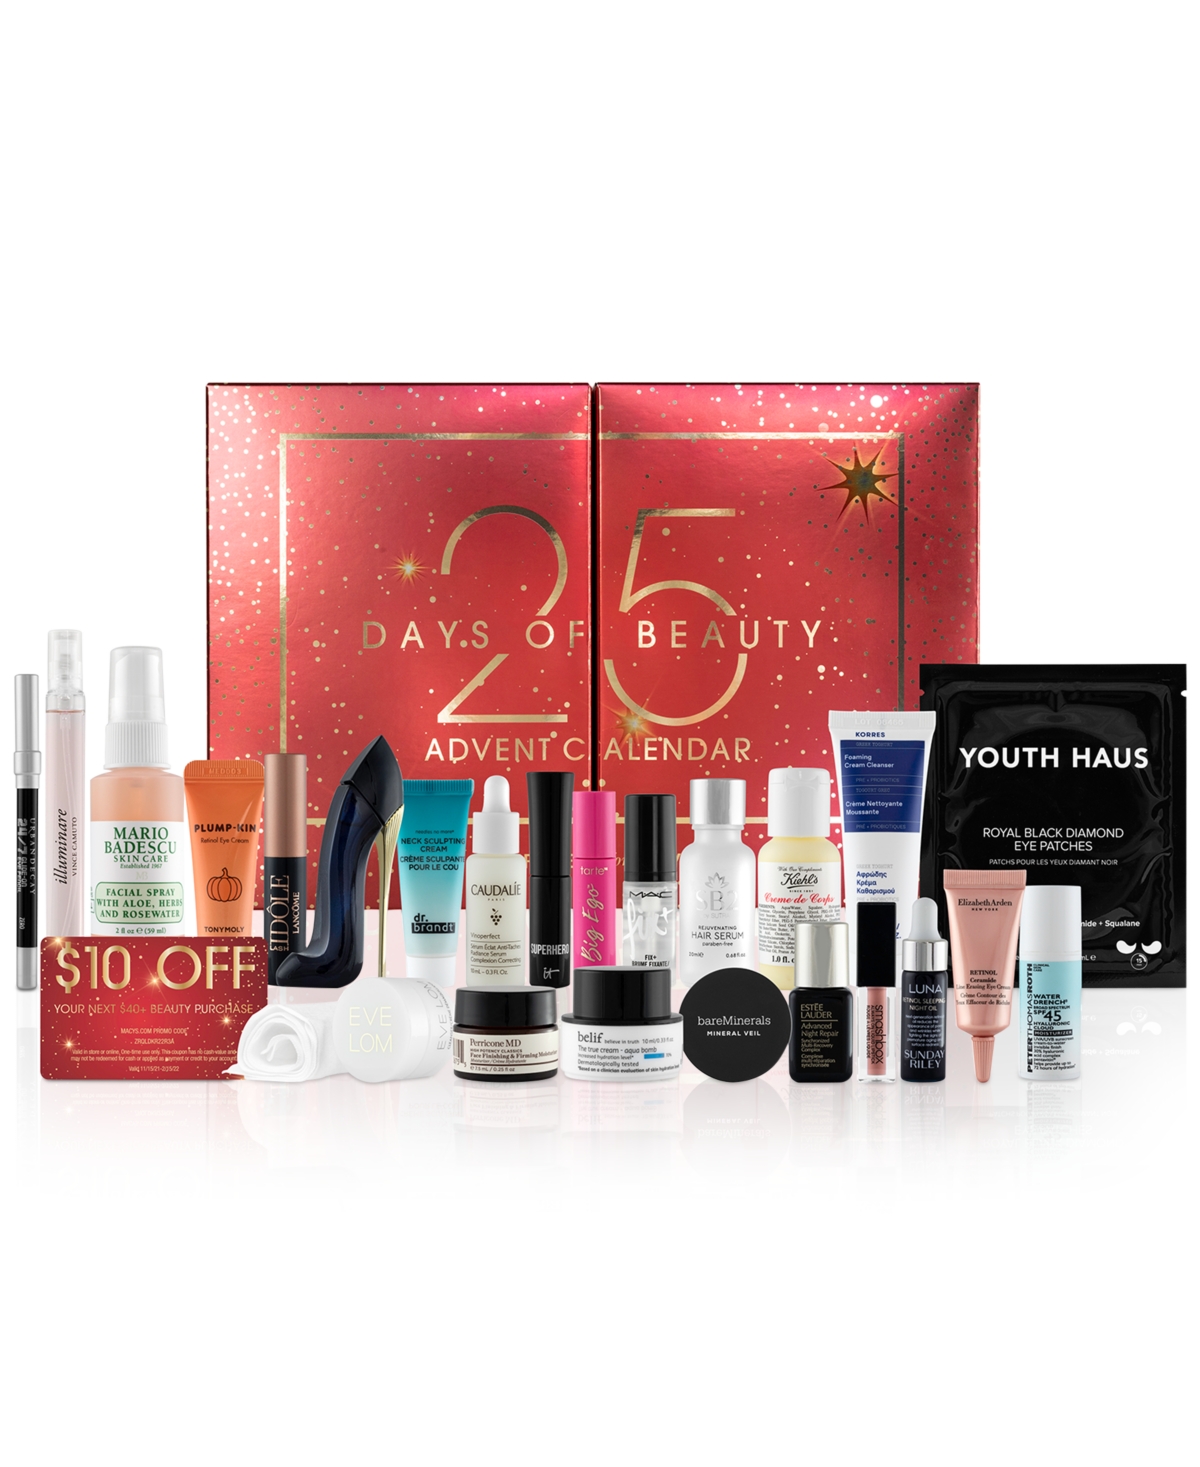 22 best beauty Advent calendars for that big countdown to X'mas